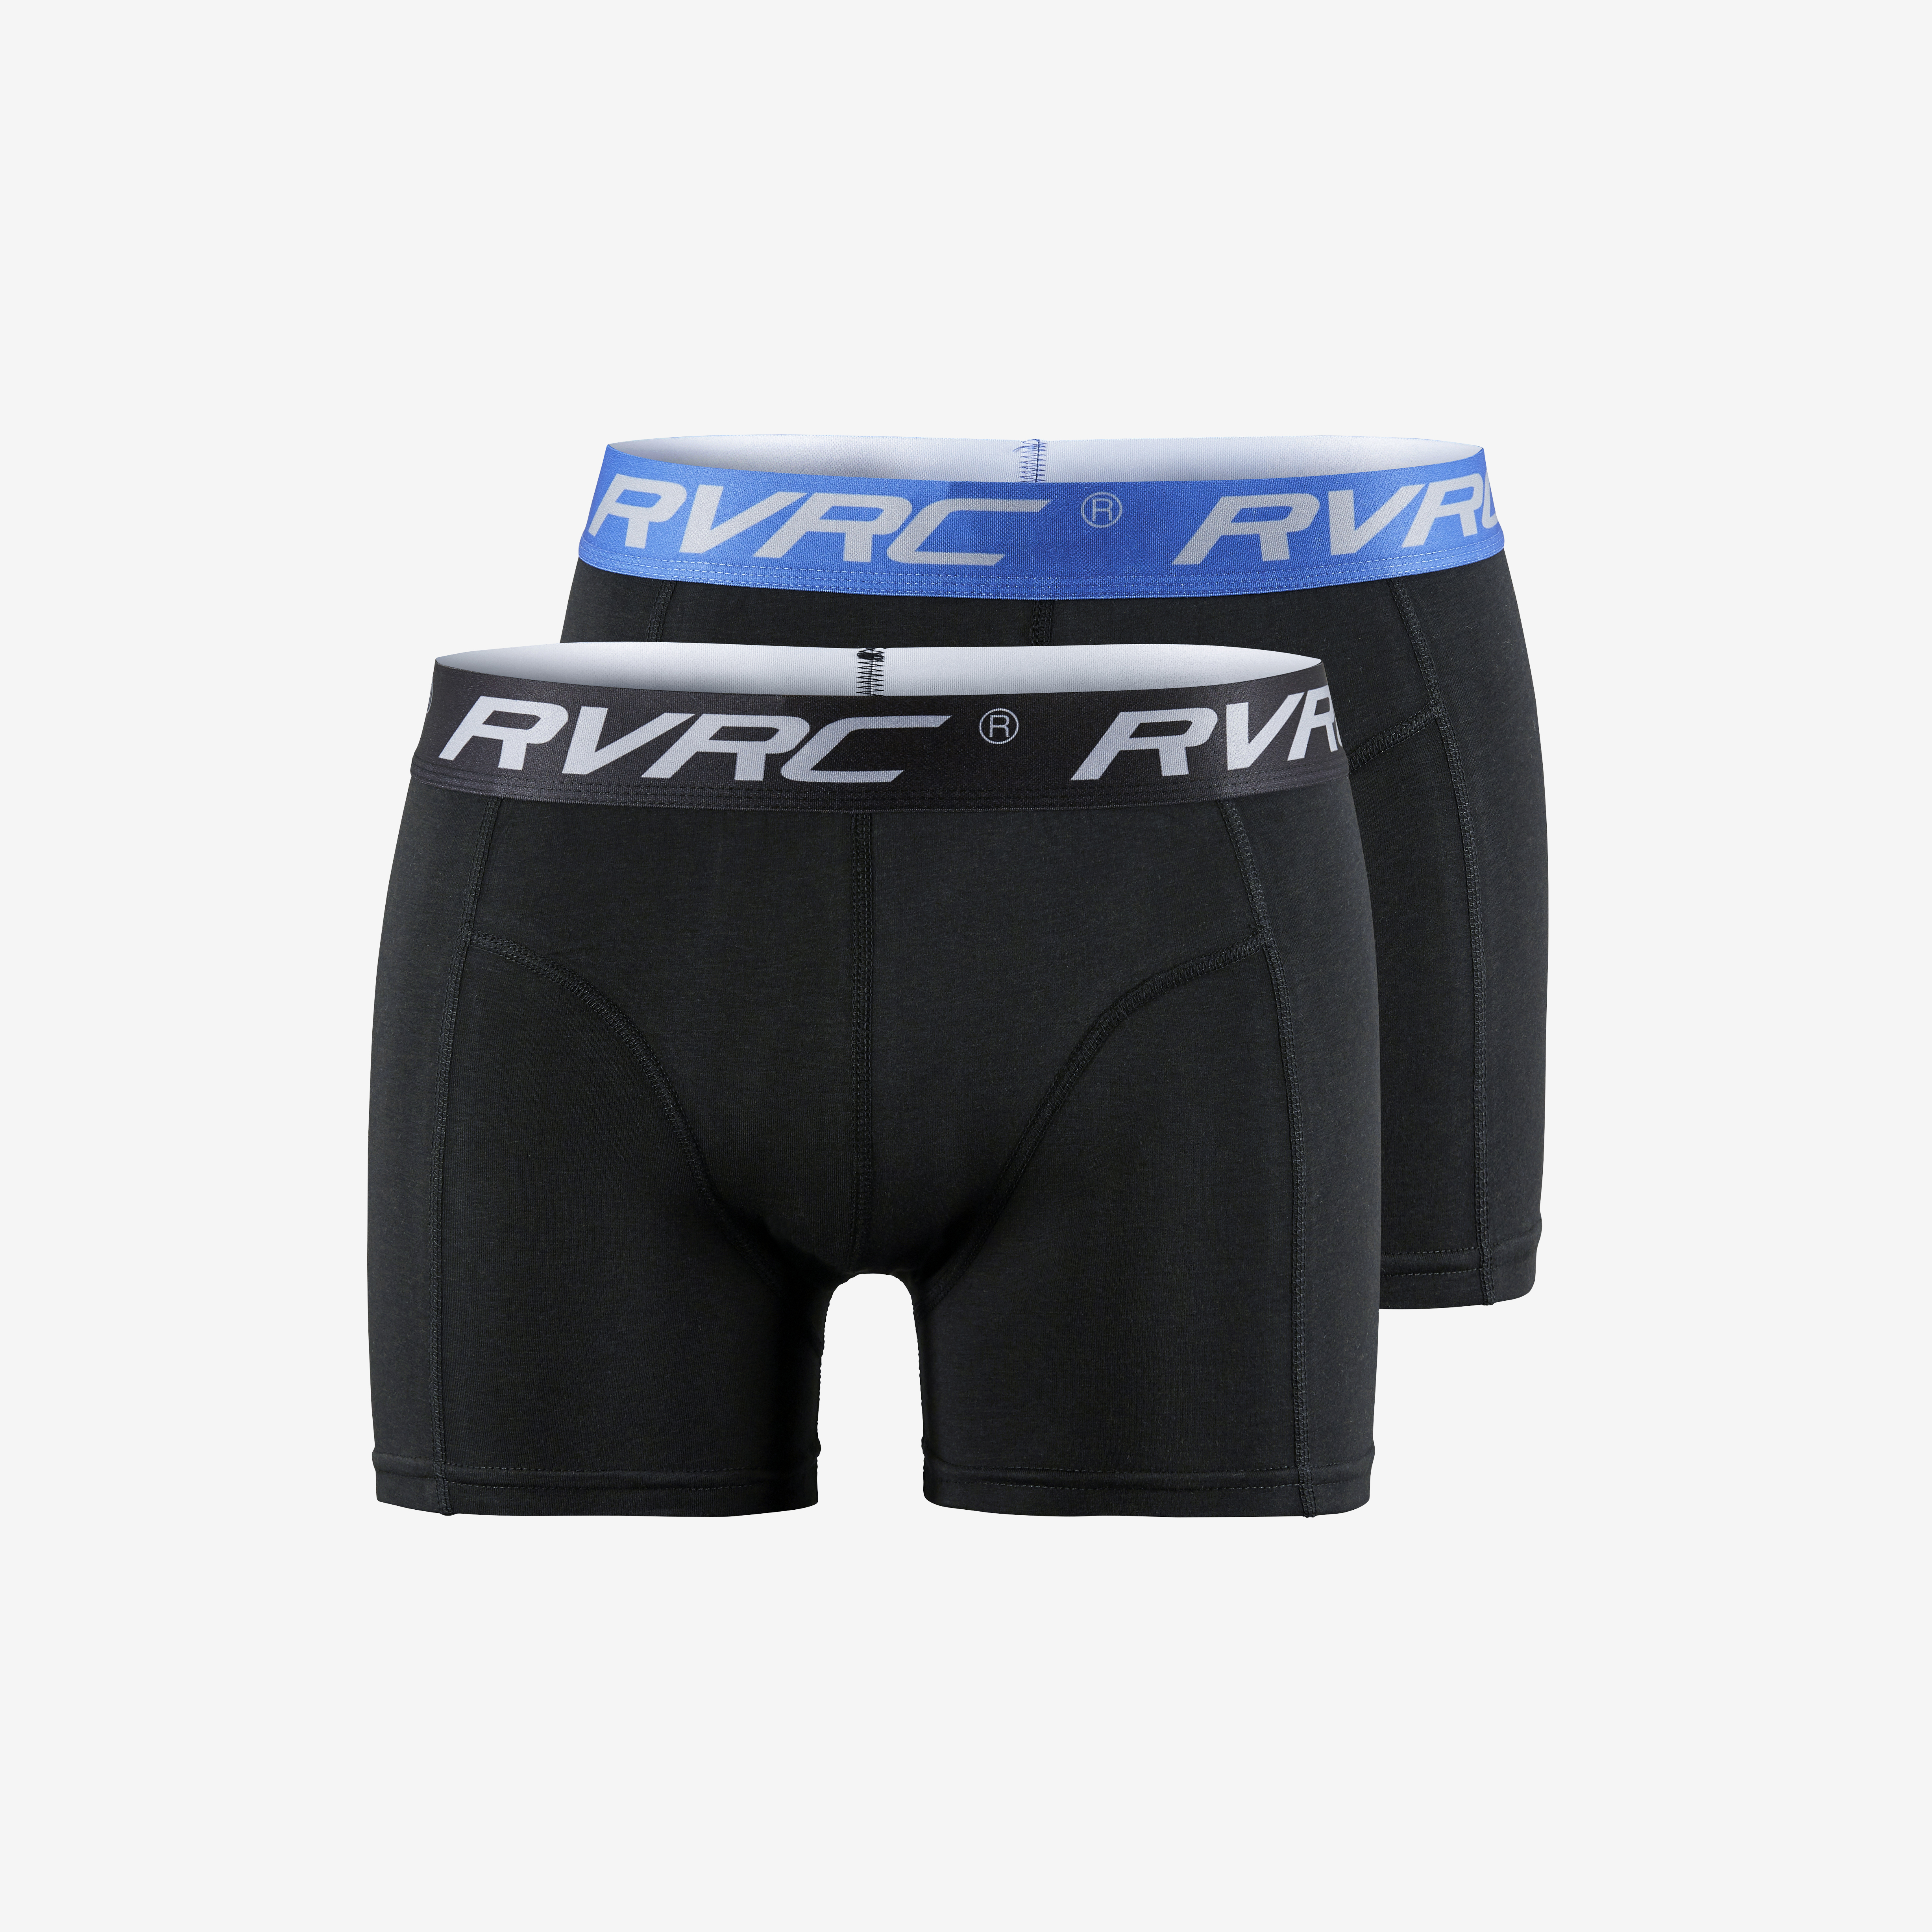 2-pack Bamboo Boxer Black/Blue Hombres